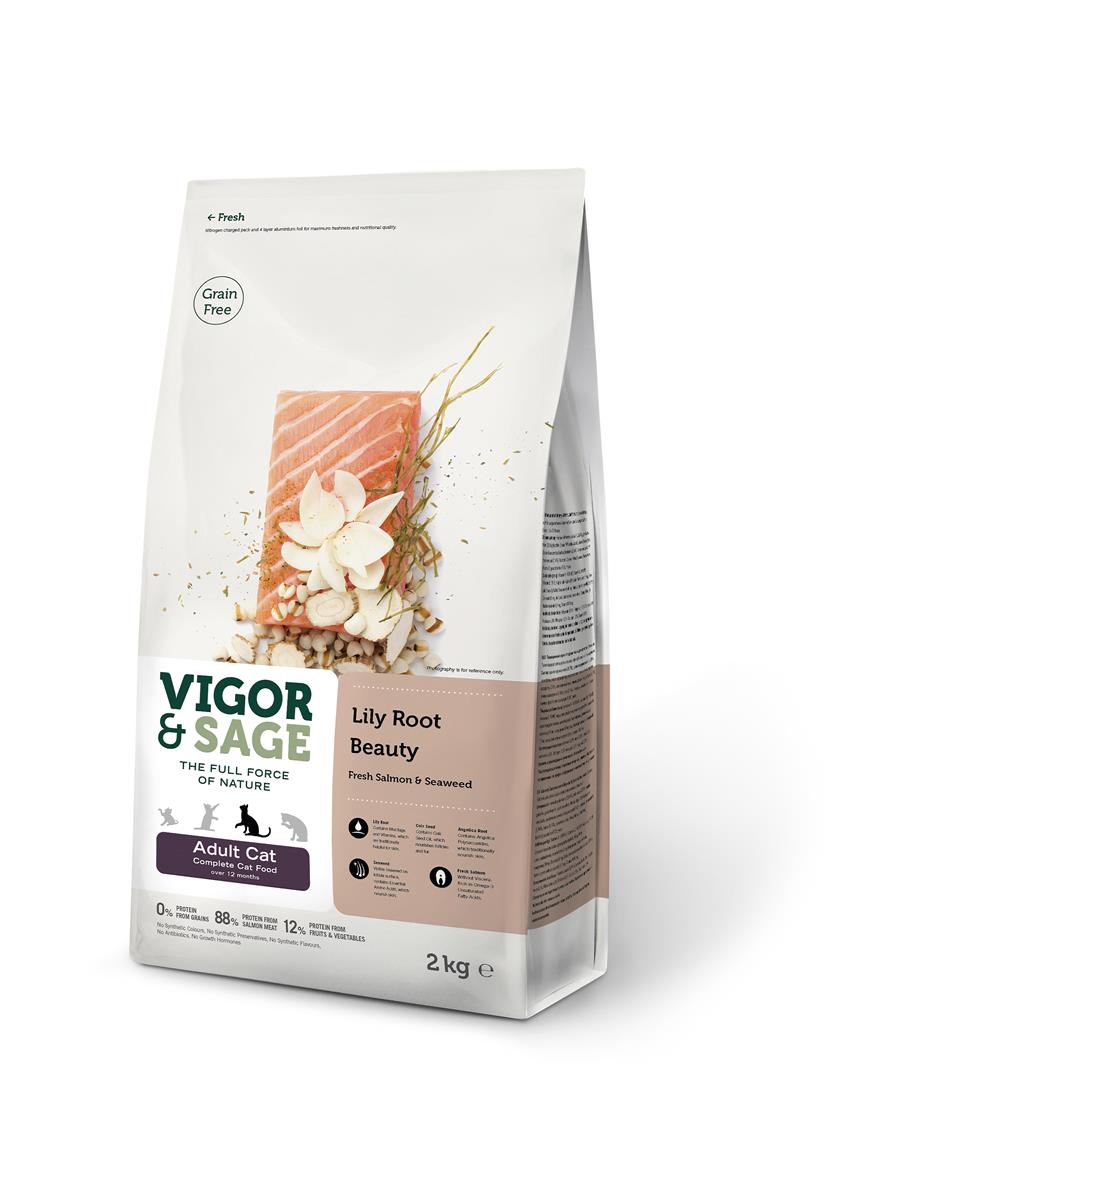 Vigor&Sage lily root beauty adult cat 2kg